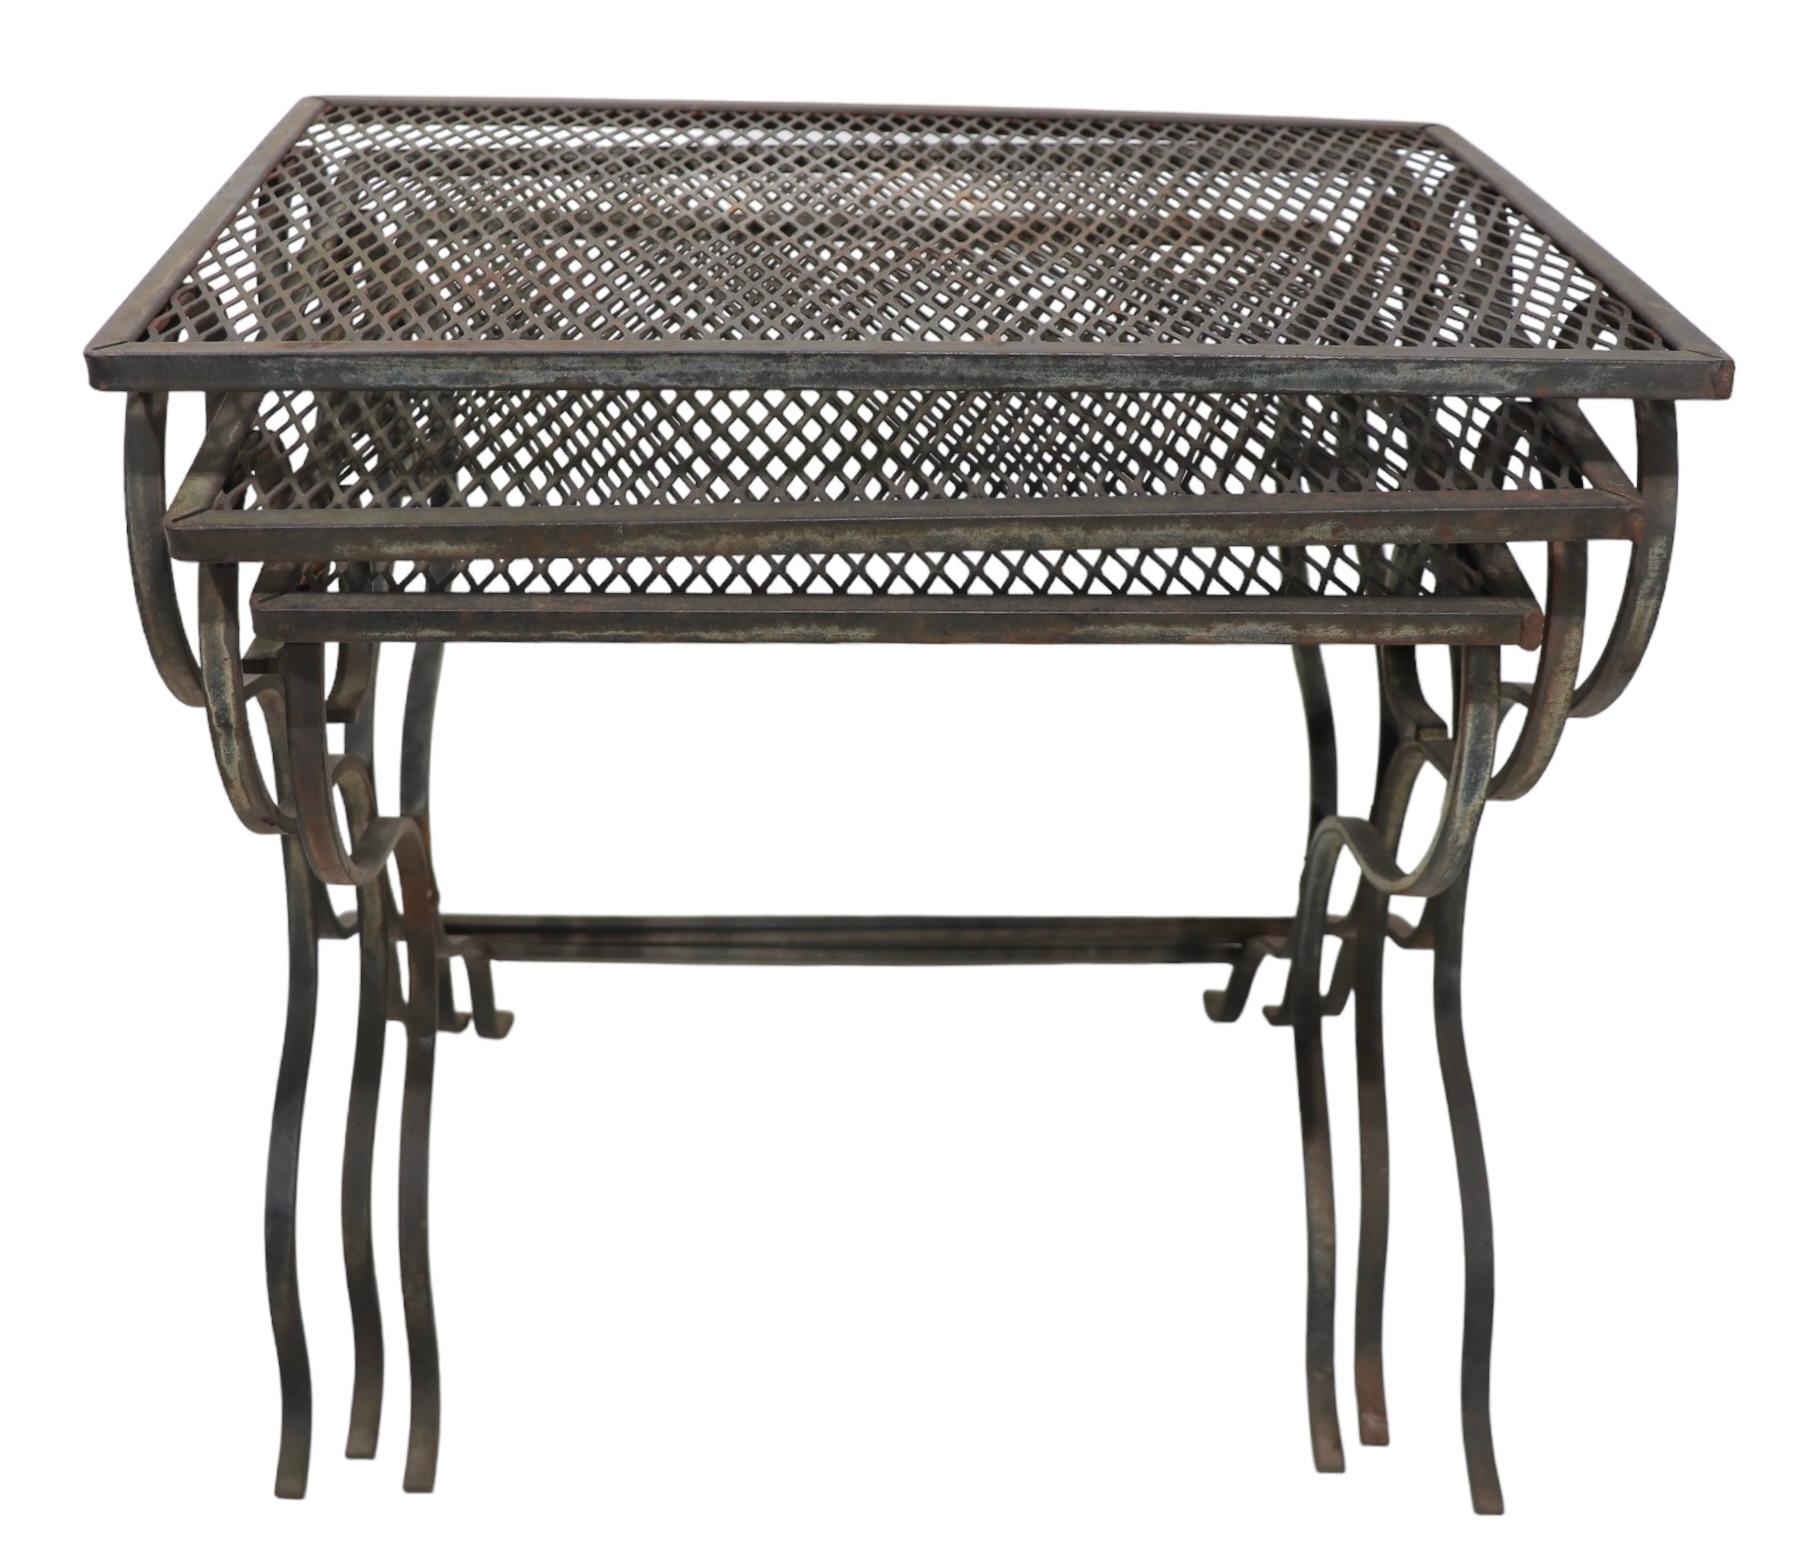 Chic set of three garden, patio, poolside tables attributed to Woodard, or possibly Salterini. The tables are graduated in size, and  feature wrought iron frames with metal mesh tops - all are in good, original vintage condition showing some